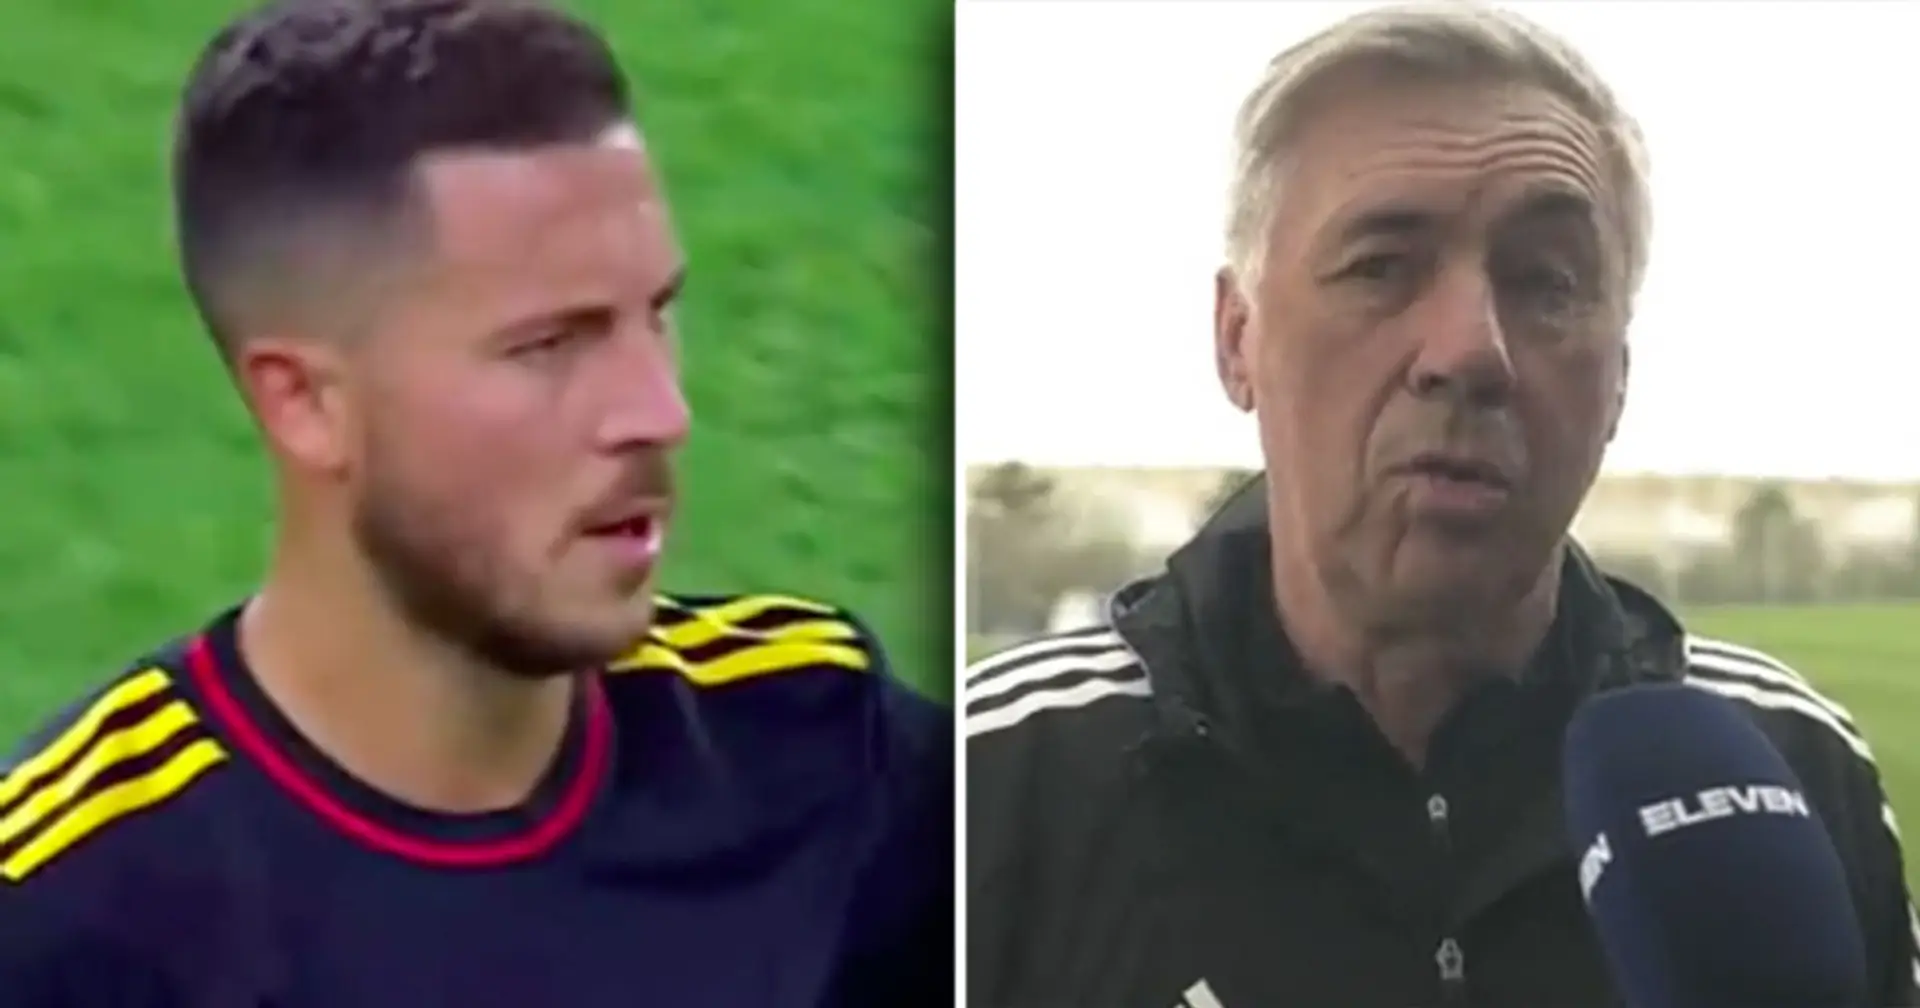 'I'm not here to give game time to every player': Ancelotti comments on Hazard situation